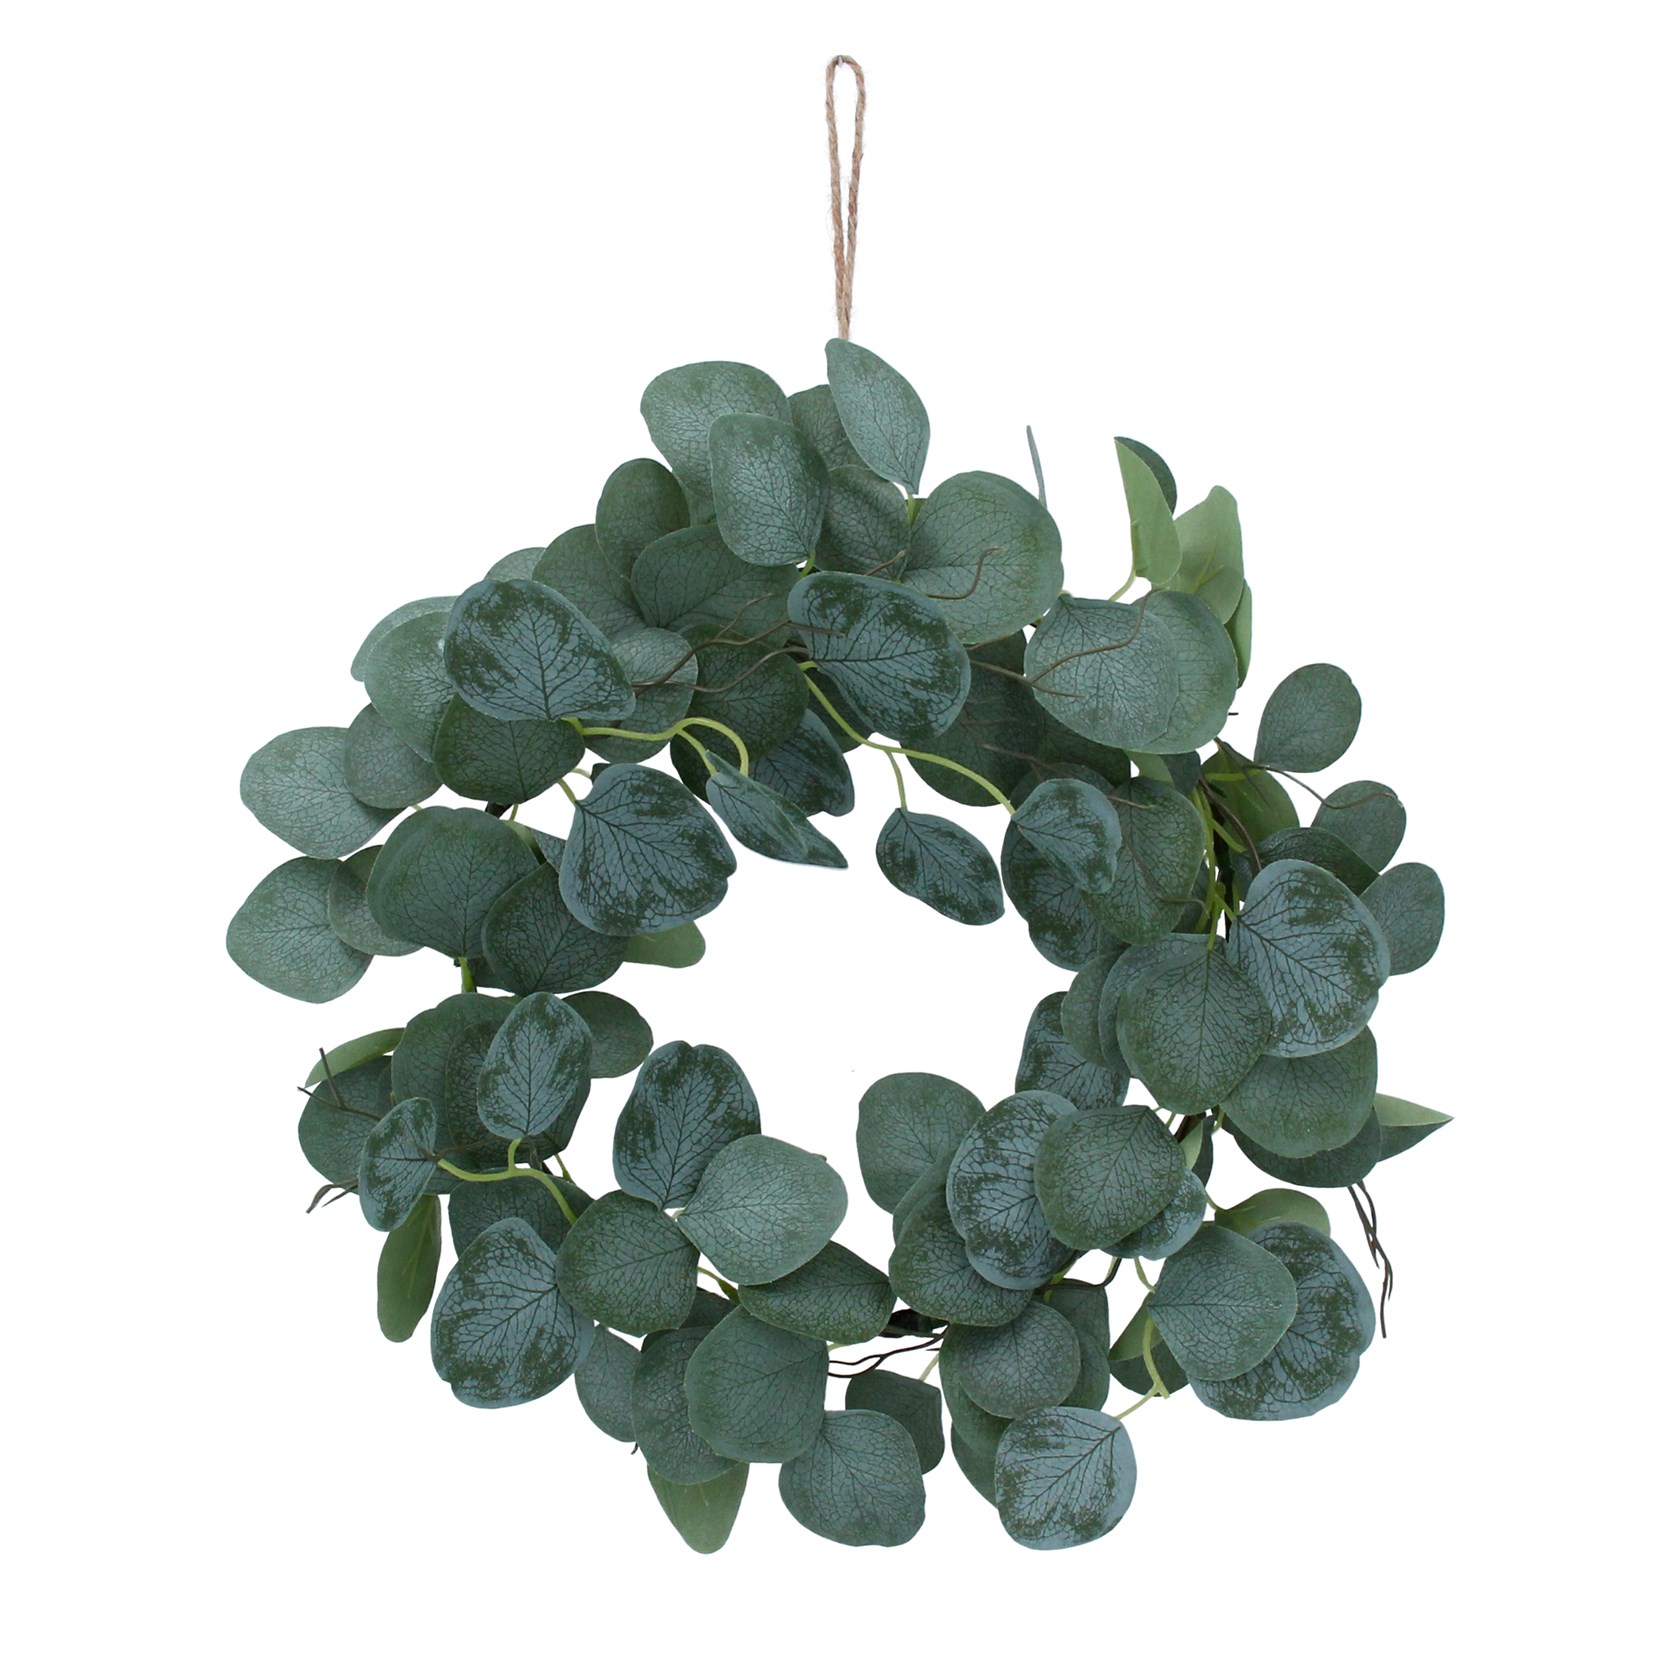 A faux green penny eucalyptus wreath. The perfect addition to your home or a gift for yourself or a loved one. By London designer Gisela Graham.